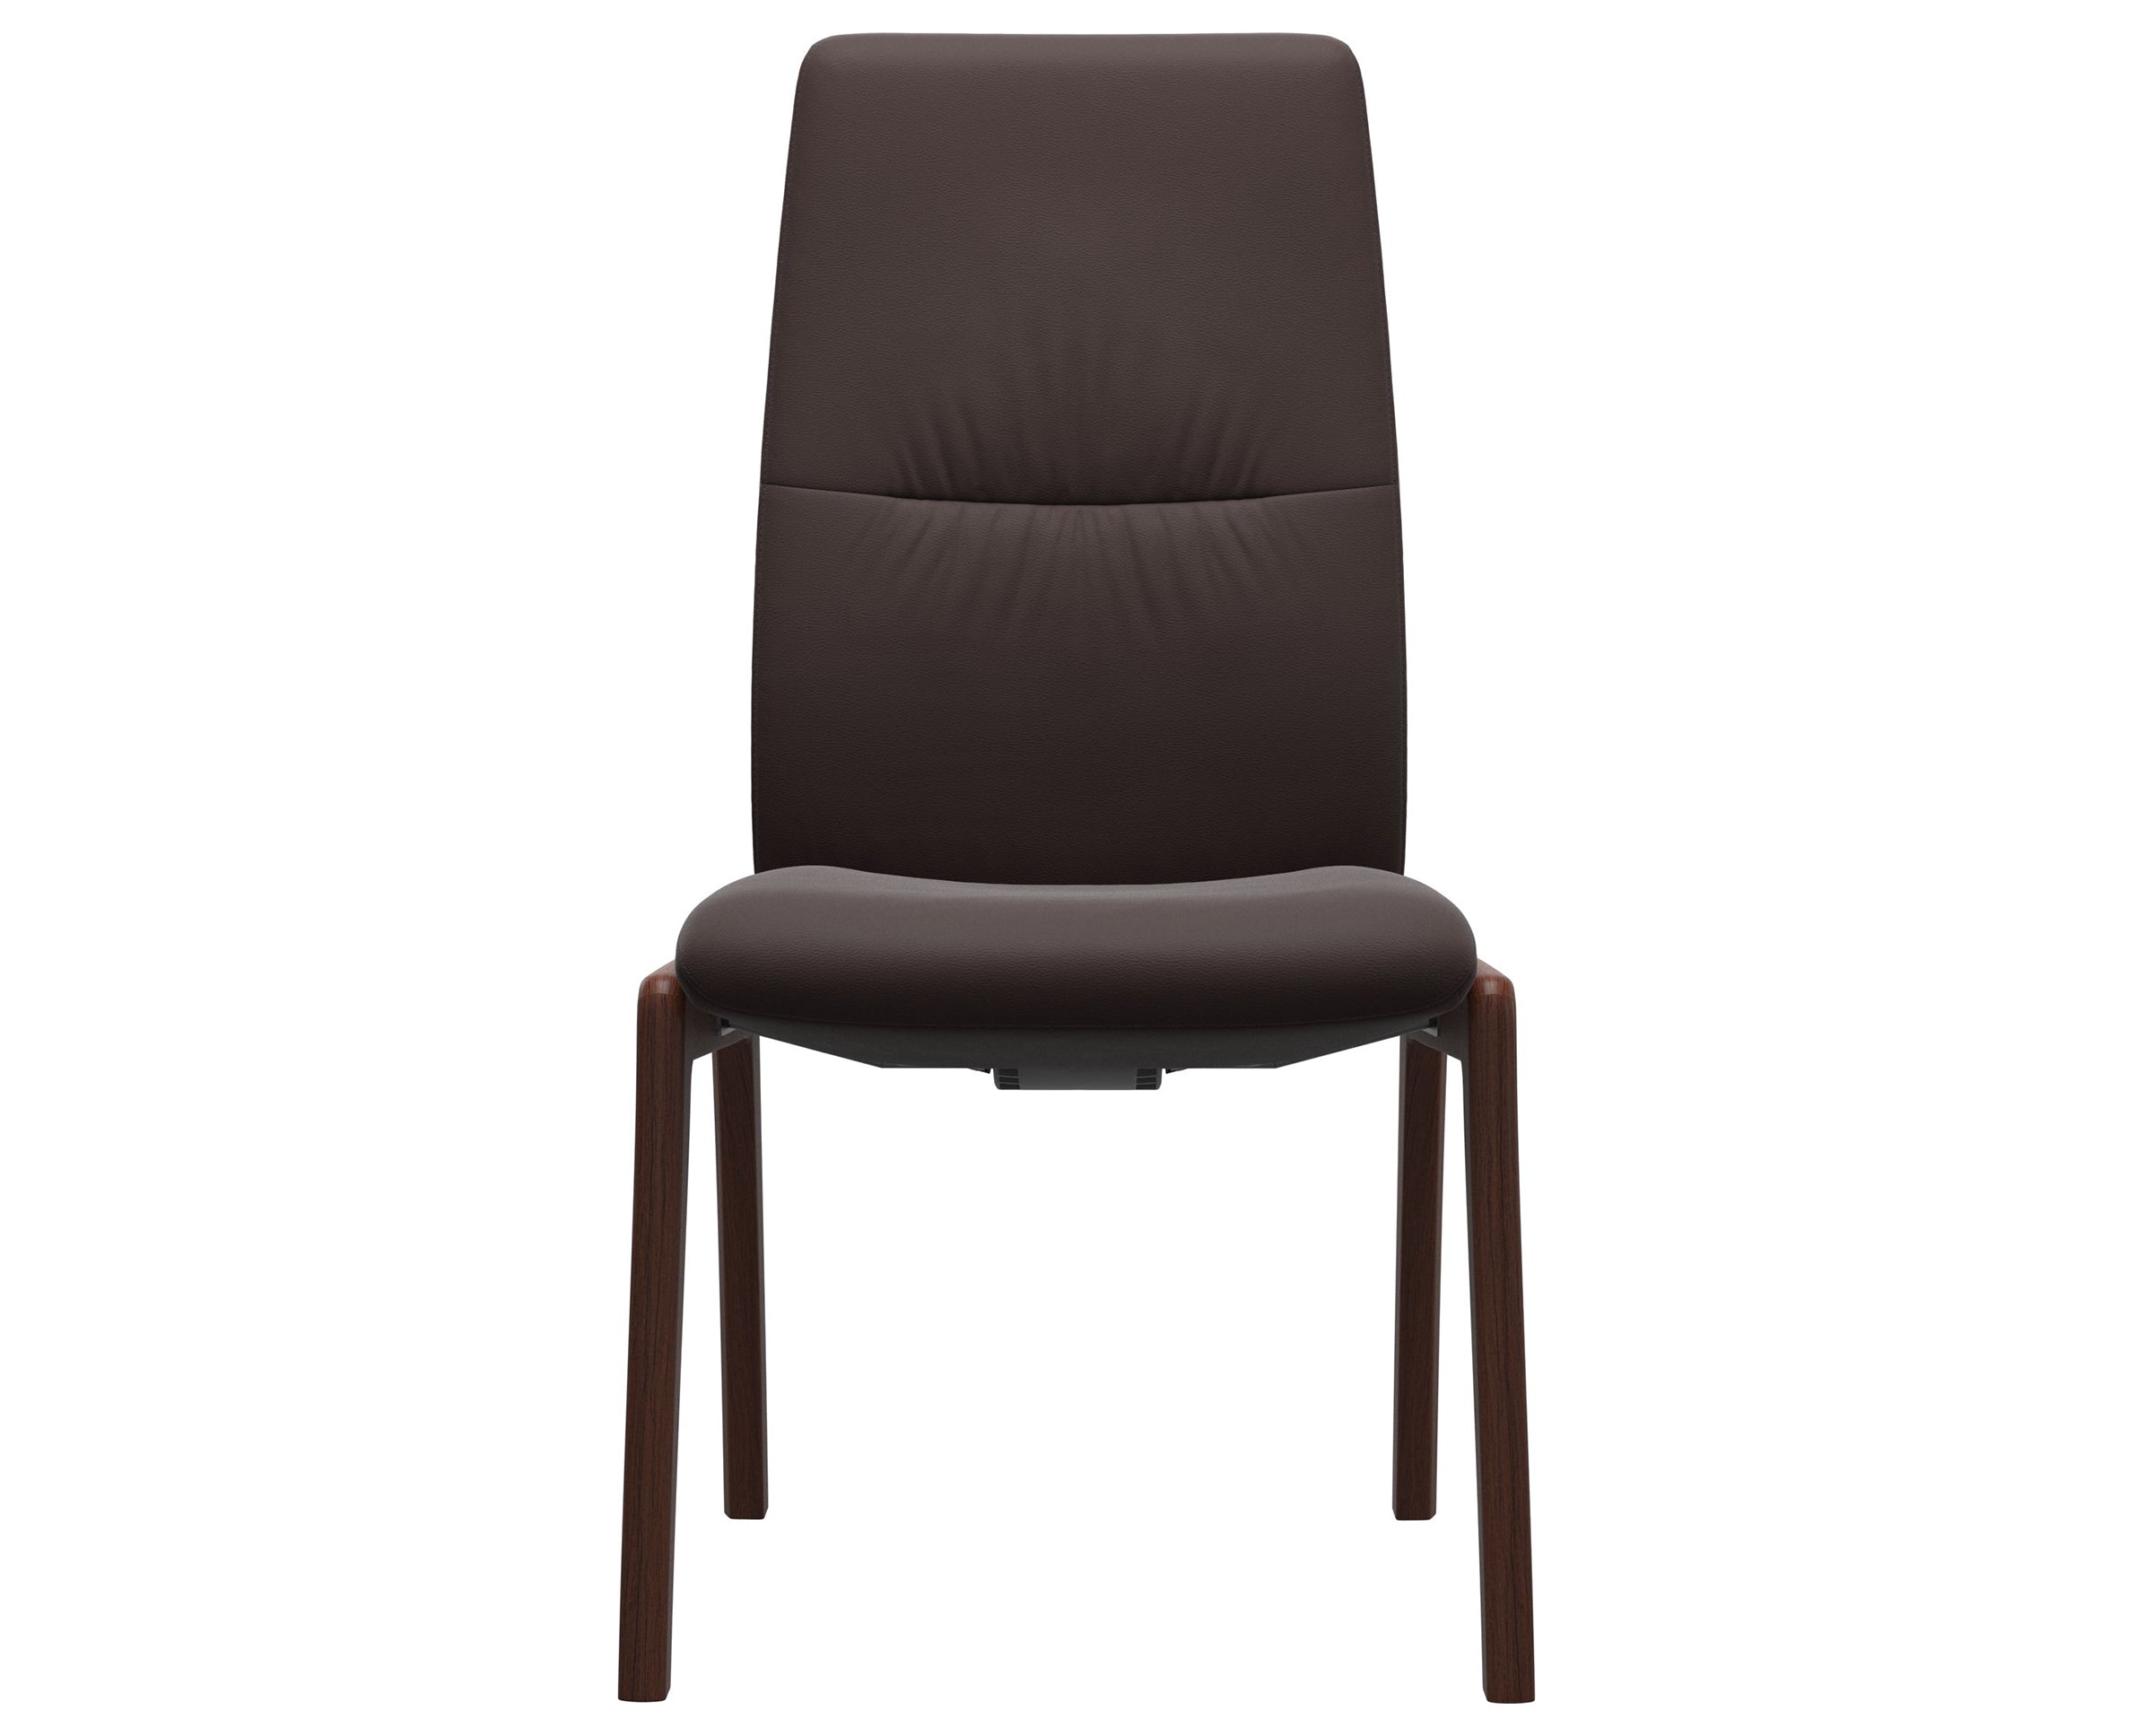 Paloma Leather Chocolate and Walnut Base | Stressless Mint High Back D100 Dining Chair | Valley Ridge Furniture